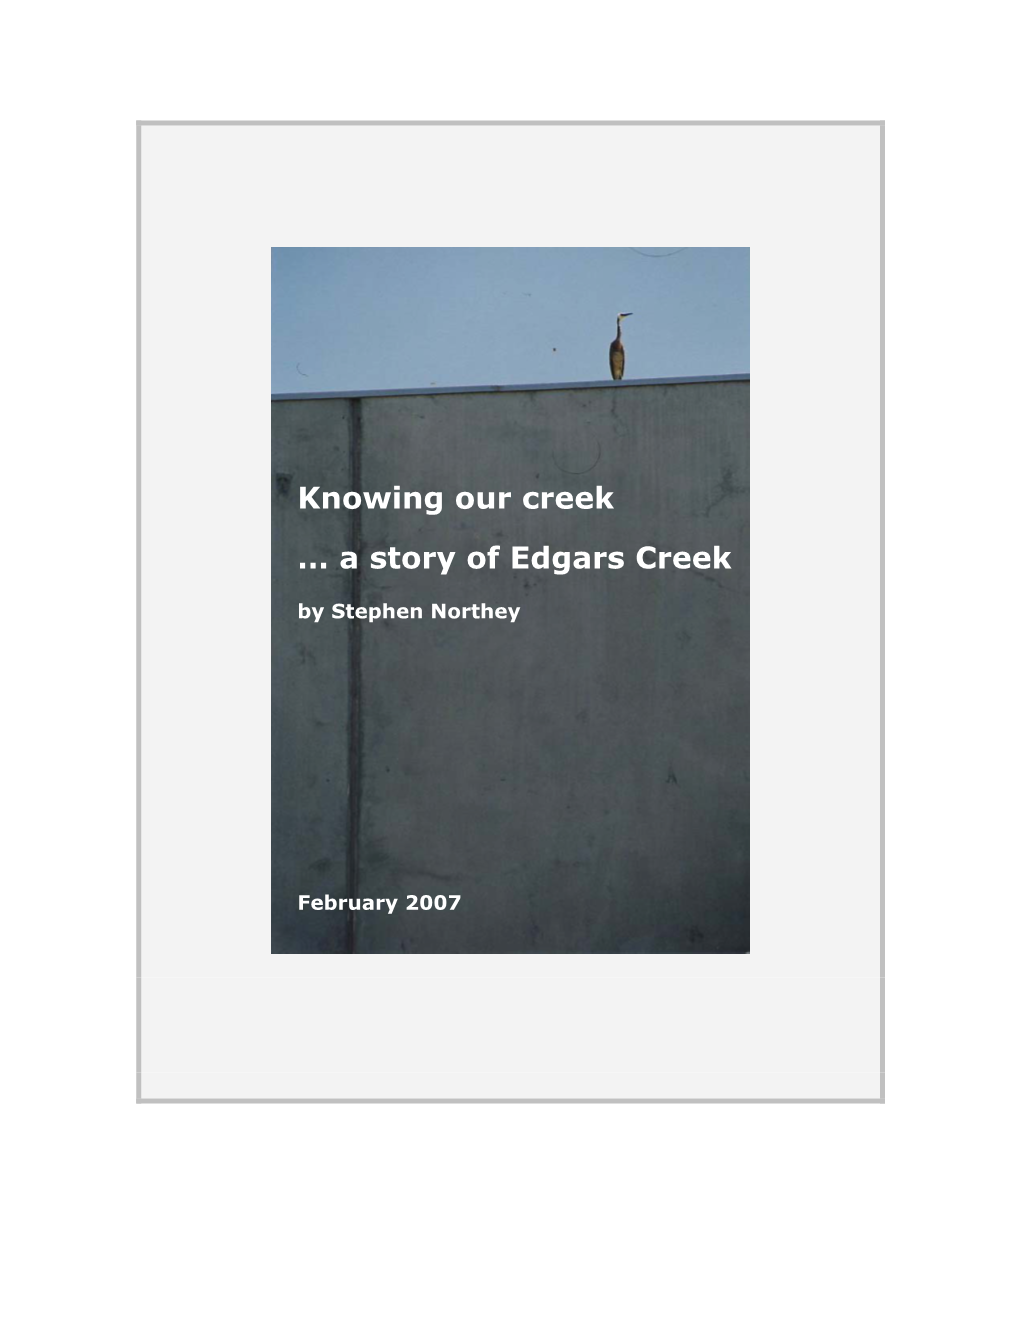 Knowing Our Creek … a Story of Edgars Creek by Stephen Northey